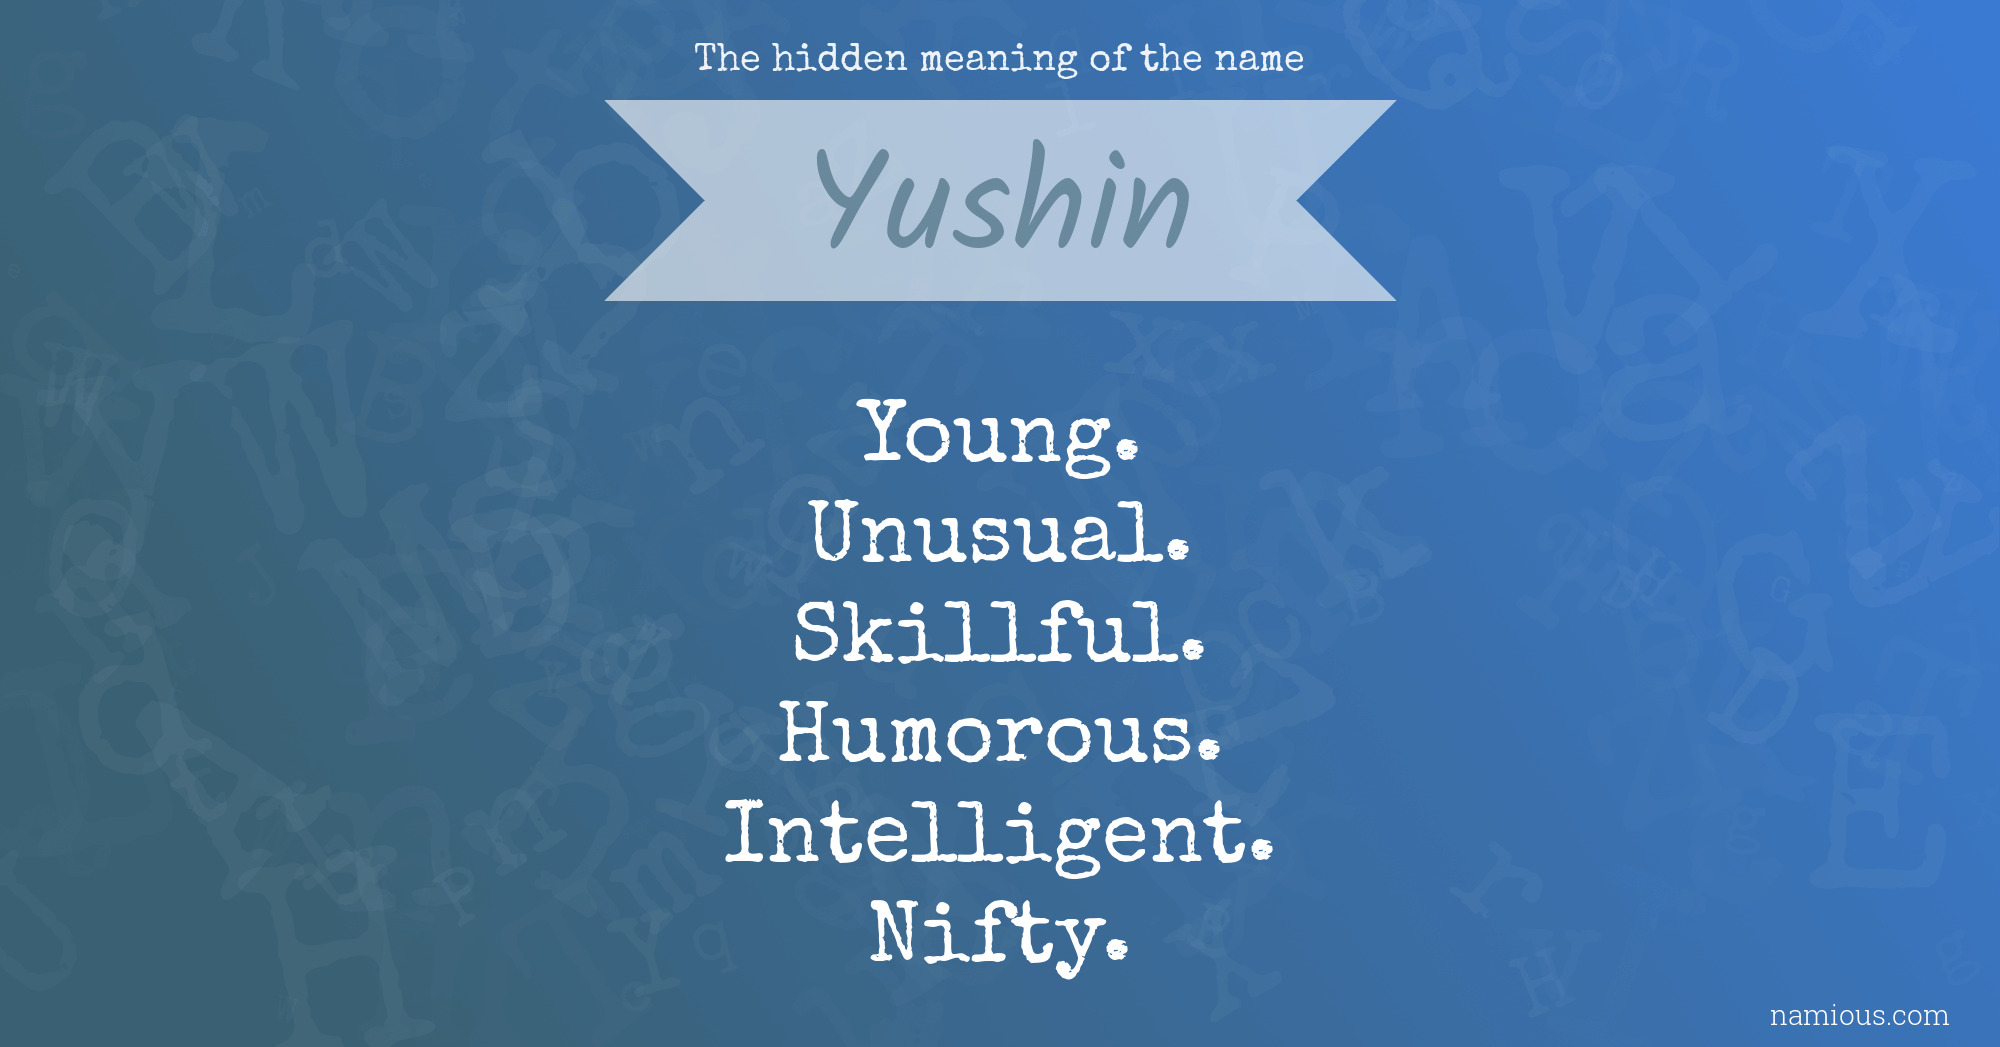 The hidden meaning of the name Yushin